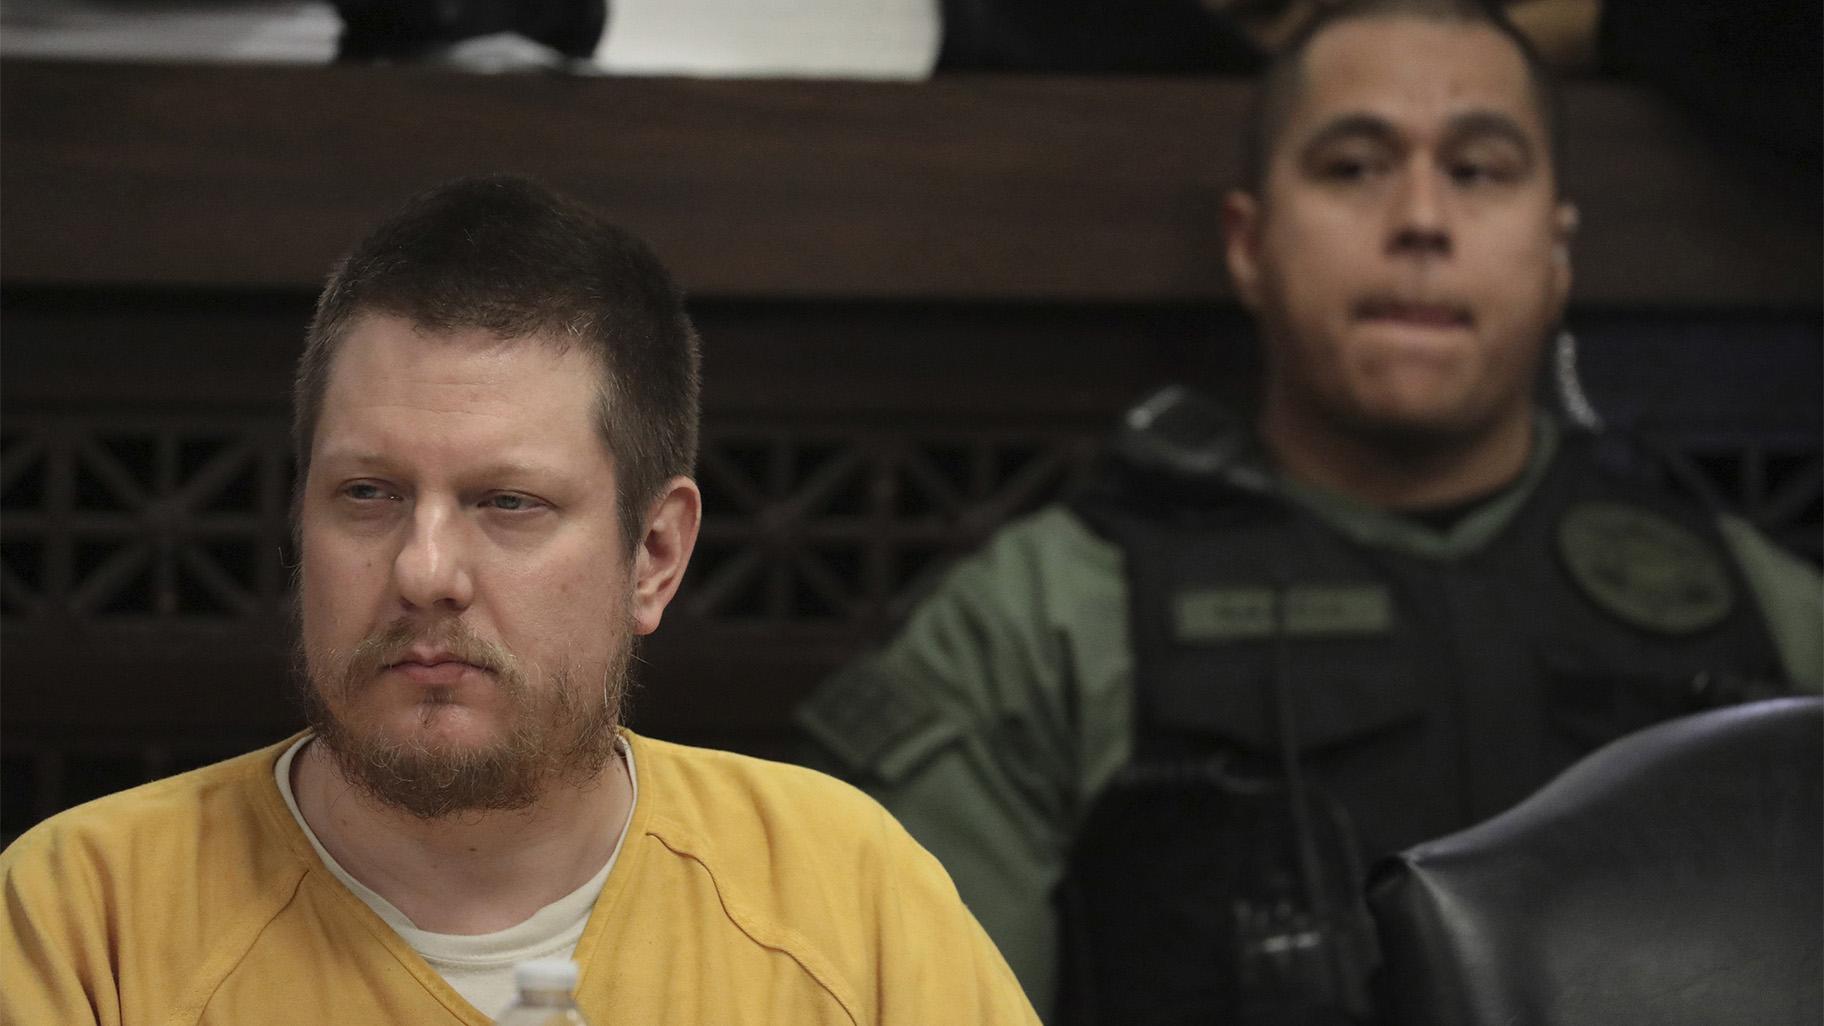 In this Jan. 18, 2019 file photo, former Chicago police Officer Jason Van Dyke, left, attends his sentencing hearing at the Leighton Criminal Court Building in Chicago, for the 2014 shooting of Laquan McDonald. (Antonio Perez / Chicago Tribune via AP, Pool, File) 